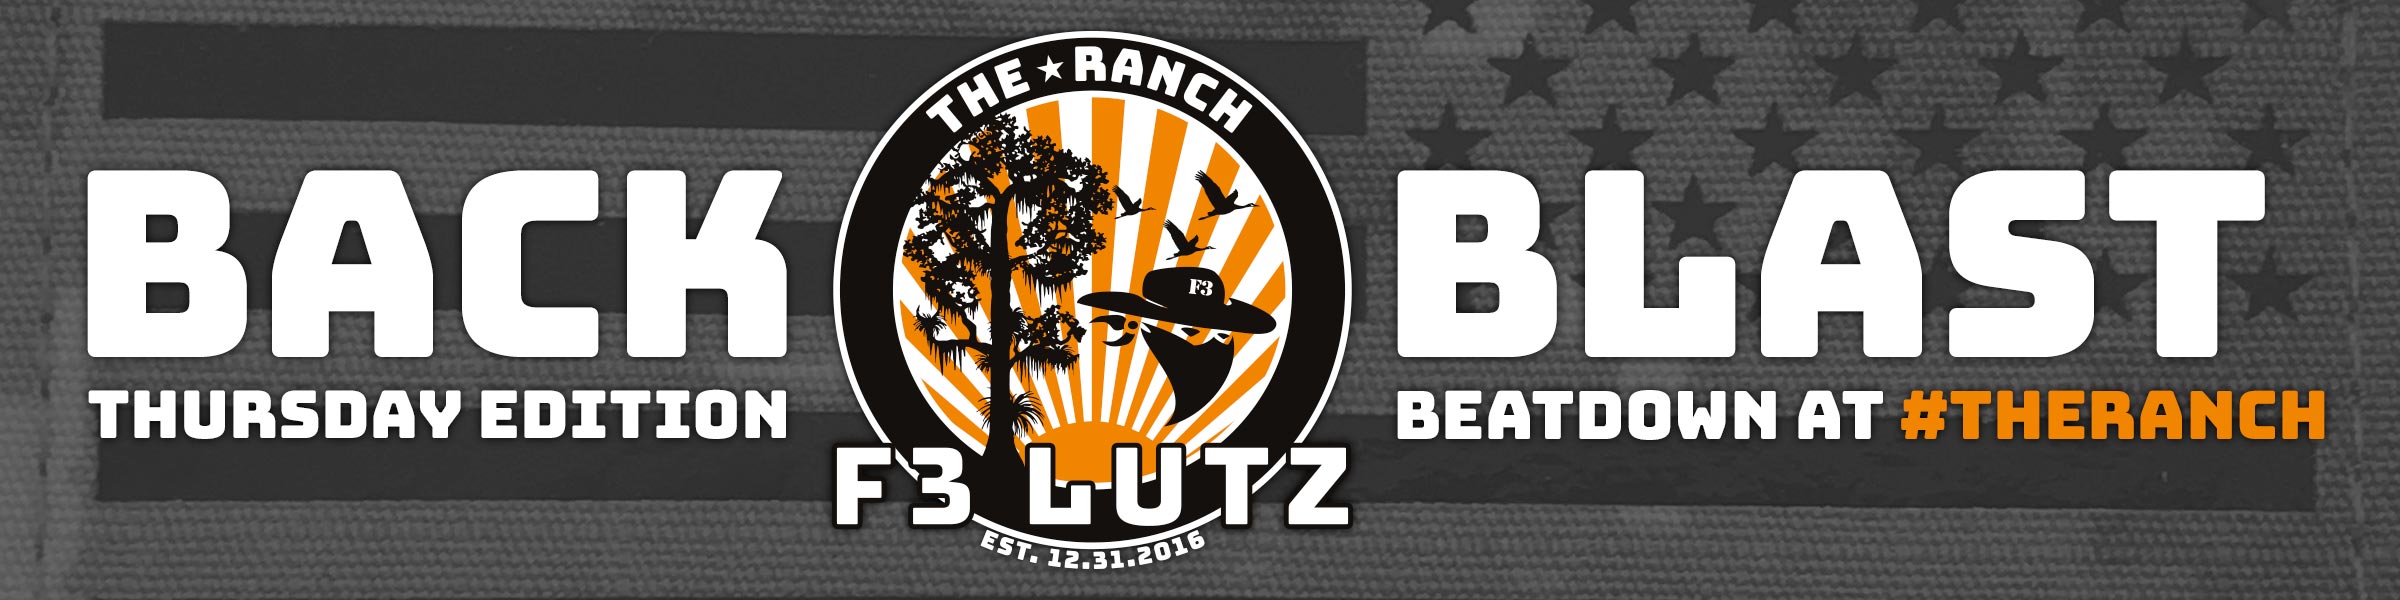 When at F3Lutz, Enter Coupon Code LB3 for Discount